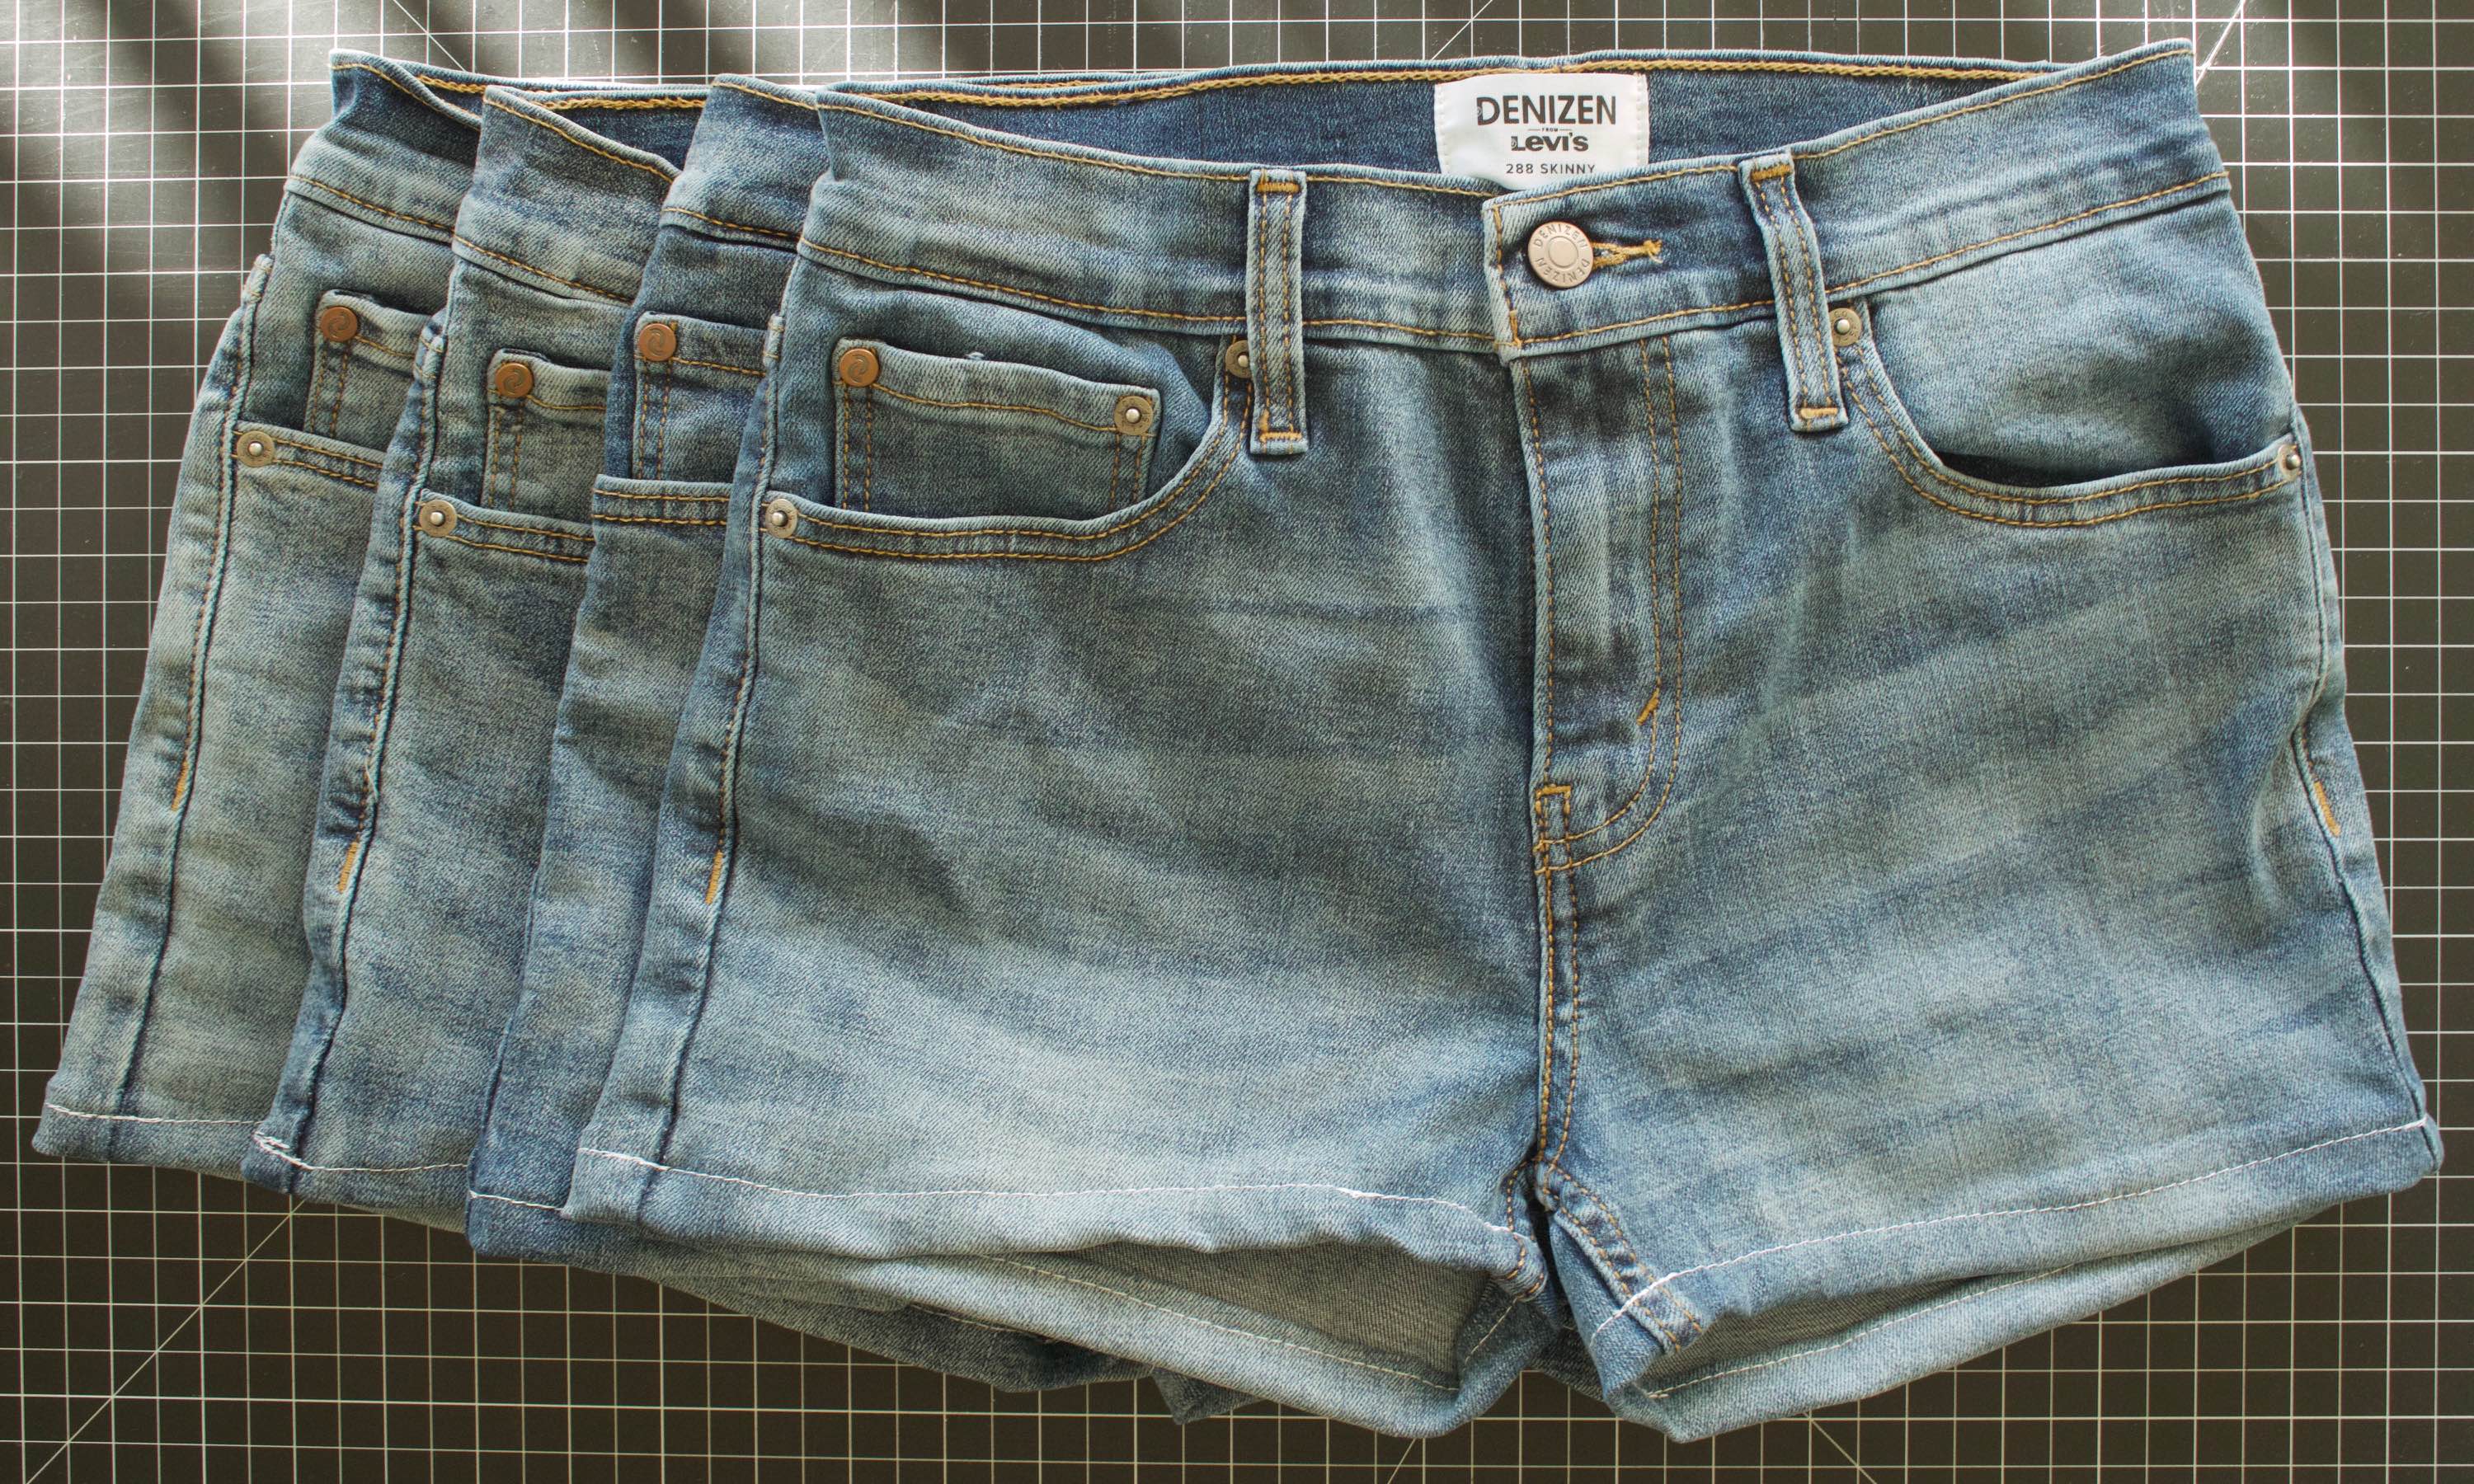 Four finished pairs of shorts.